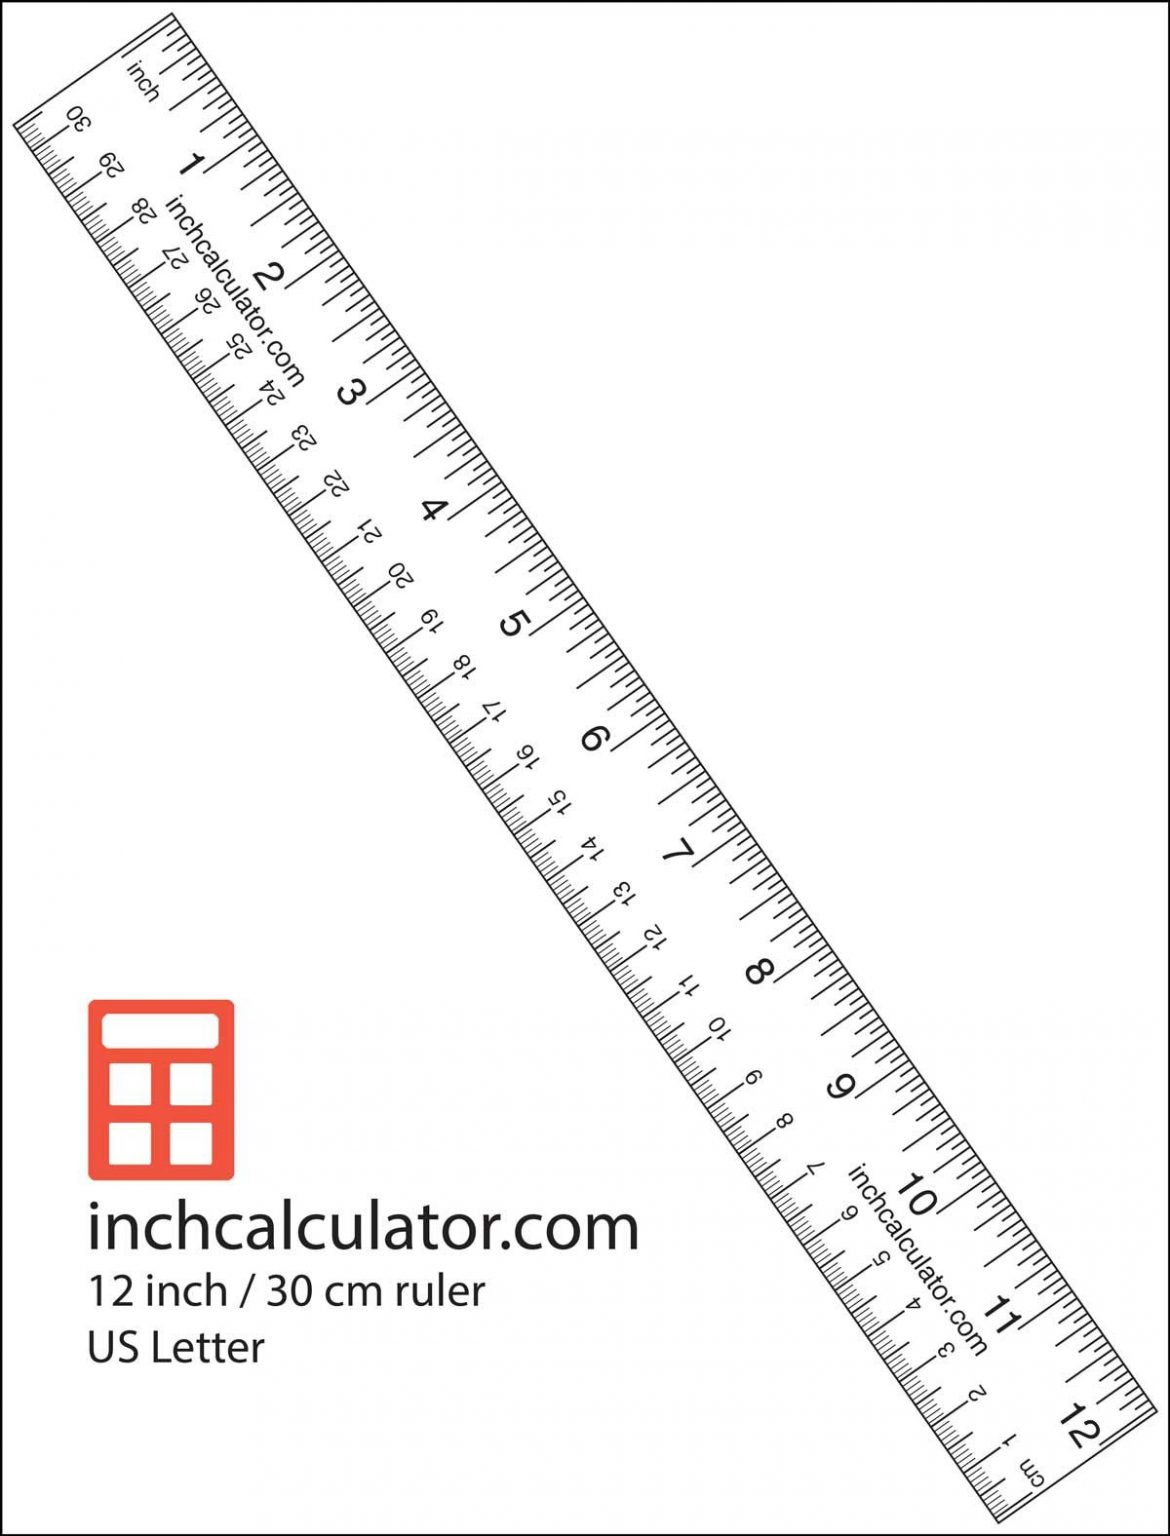 How To Read A Ruler Nick Cornwelltechnology Education Printable Ruler